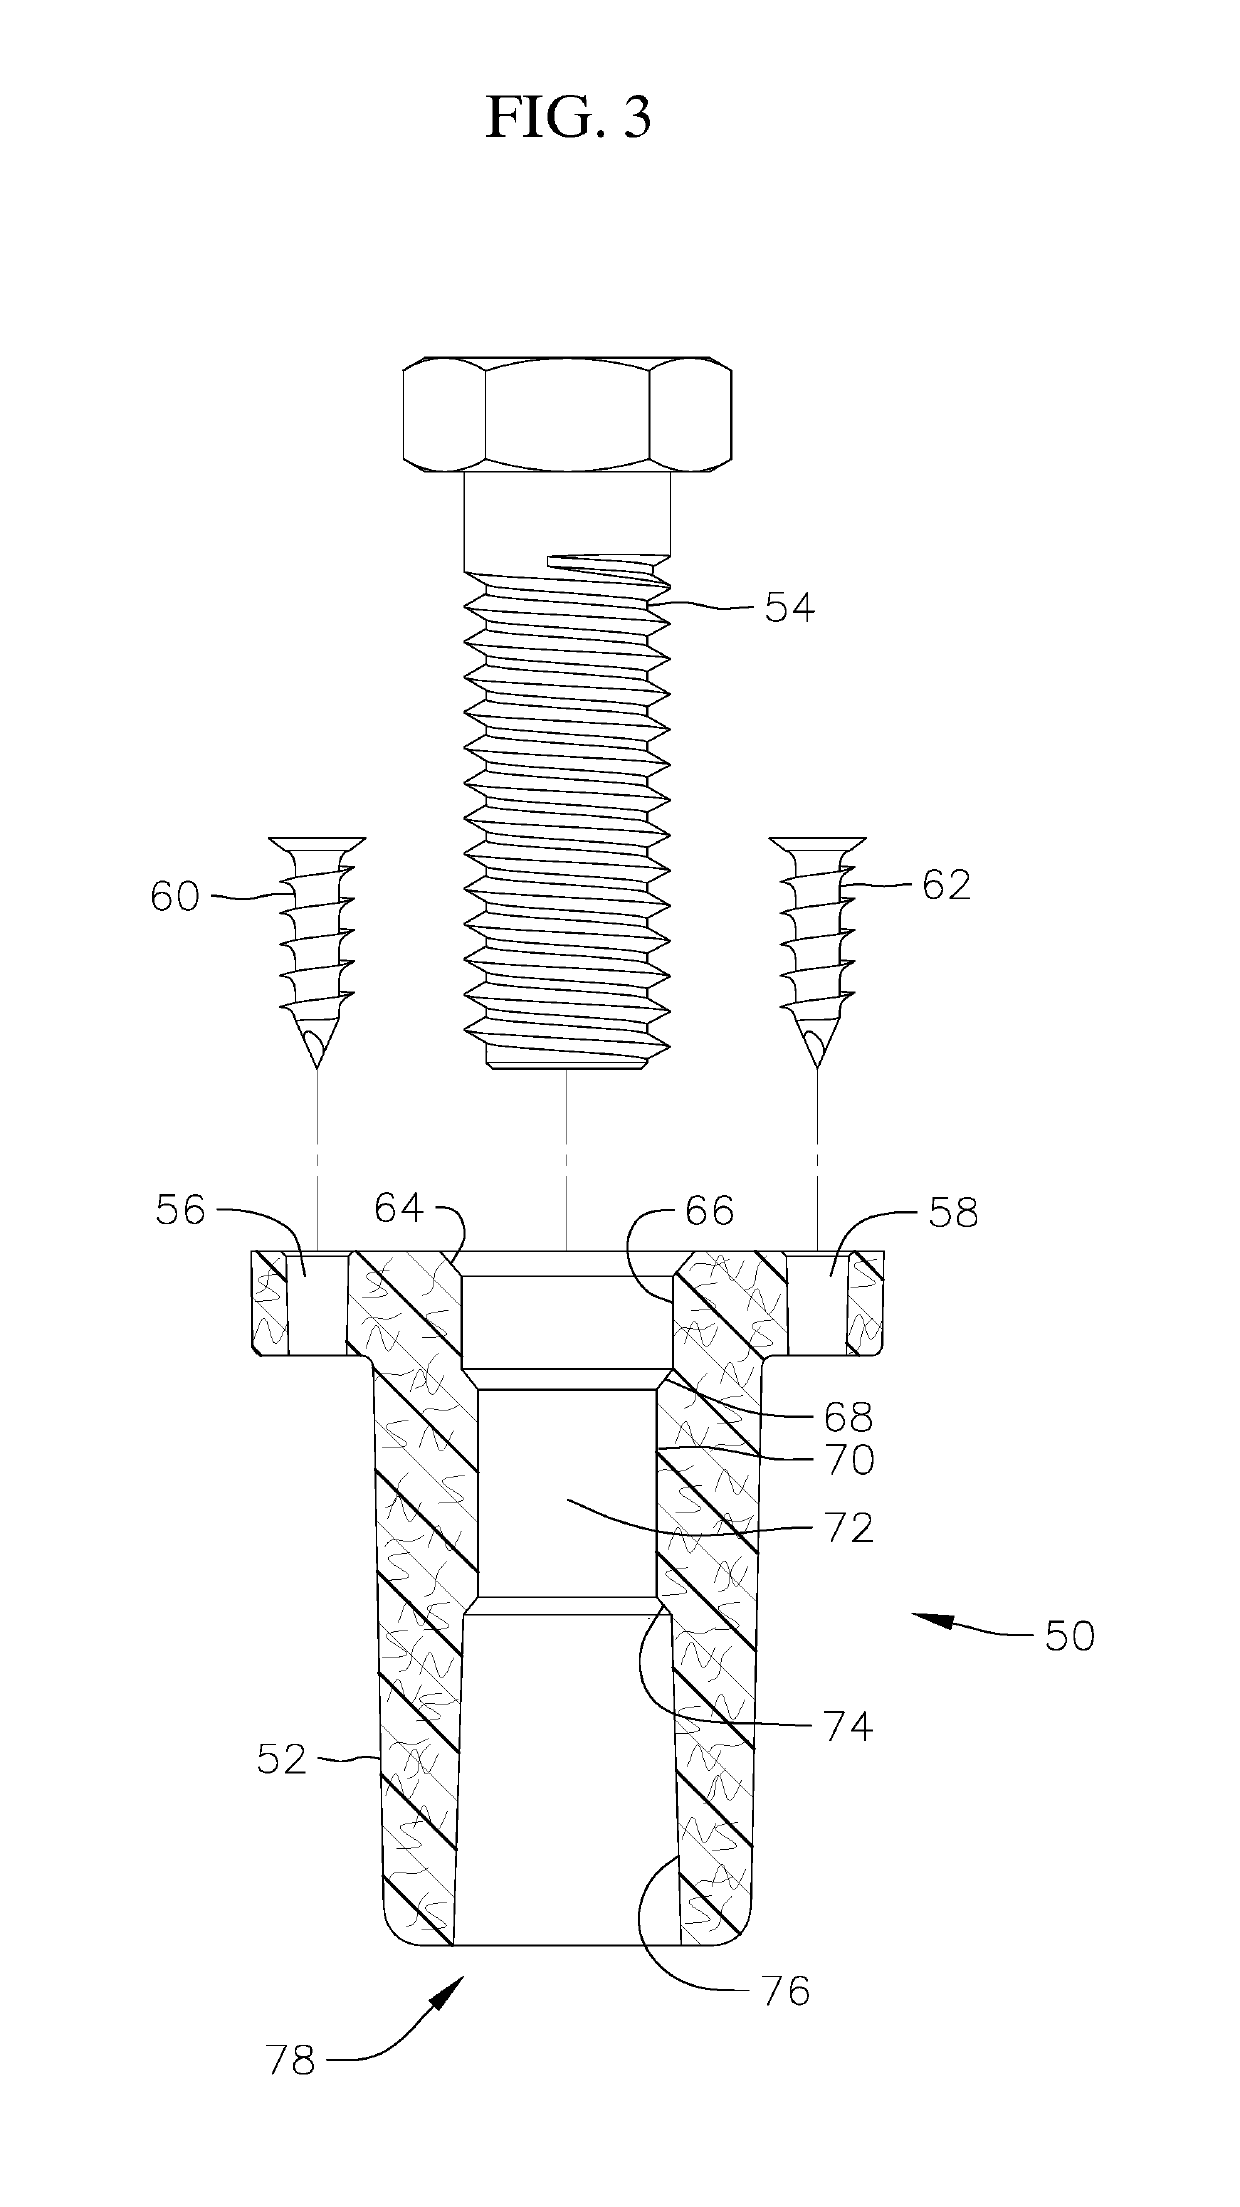 Fastening system allowing component removal after fastener system failure